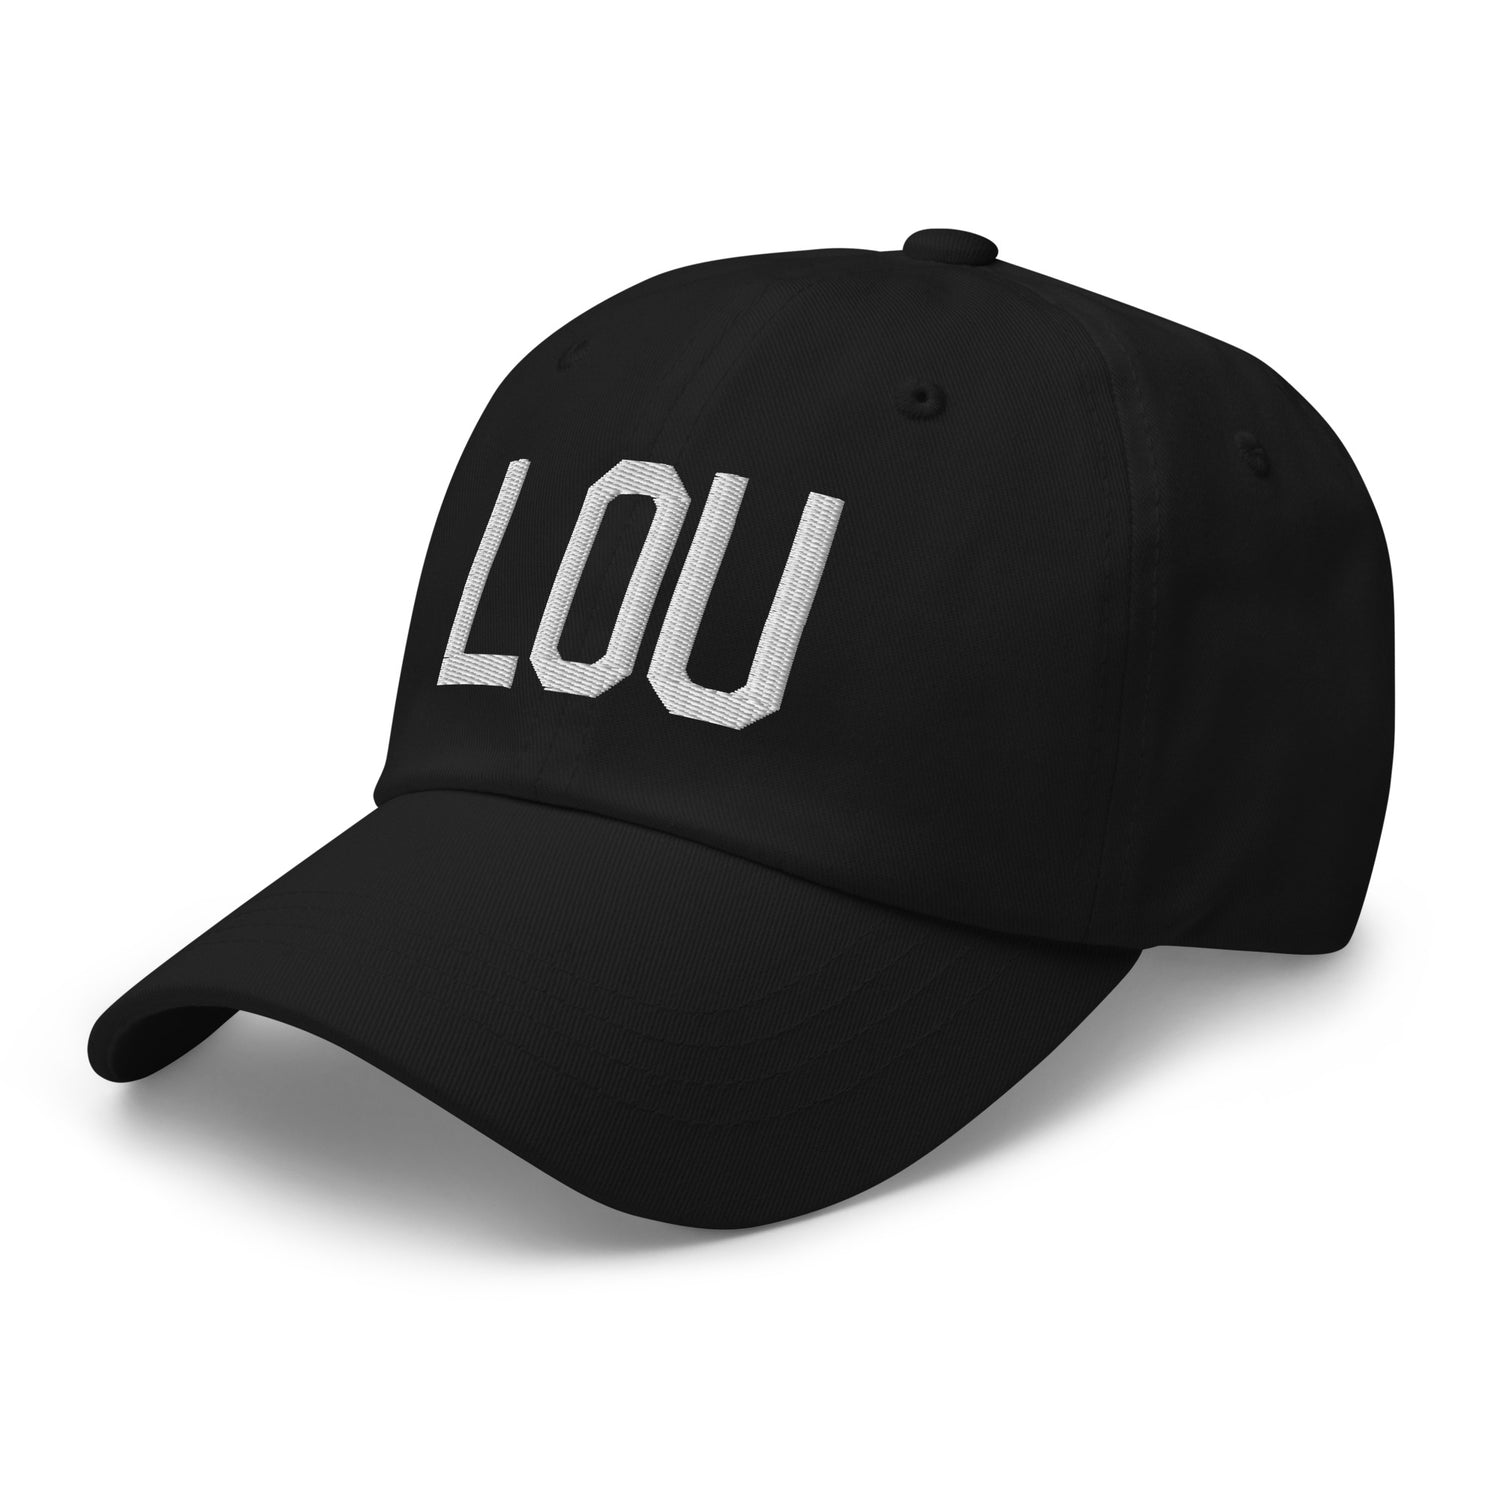 Louisville Kentucky Aviation and Travel Gifts Under $50 • LOU Airport Code